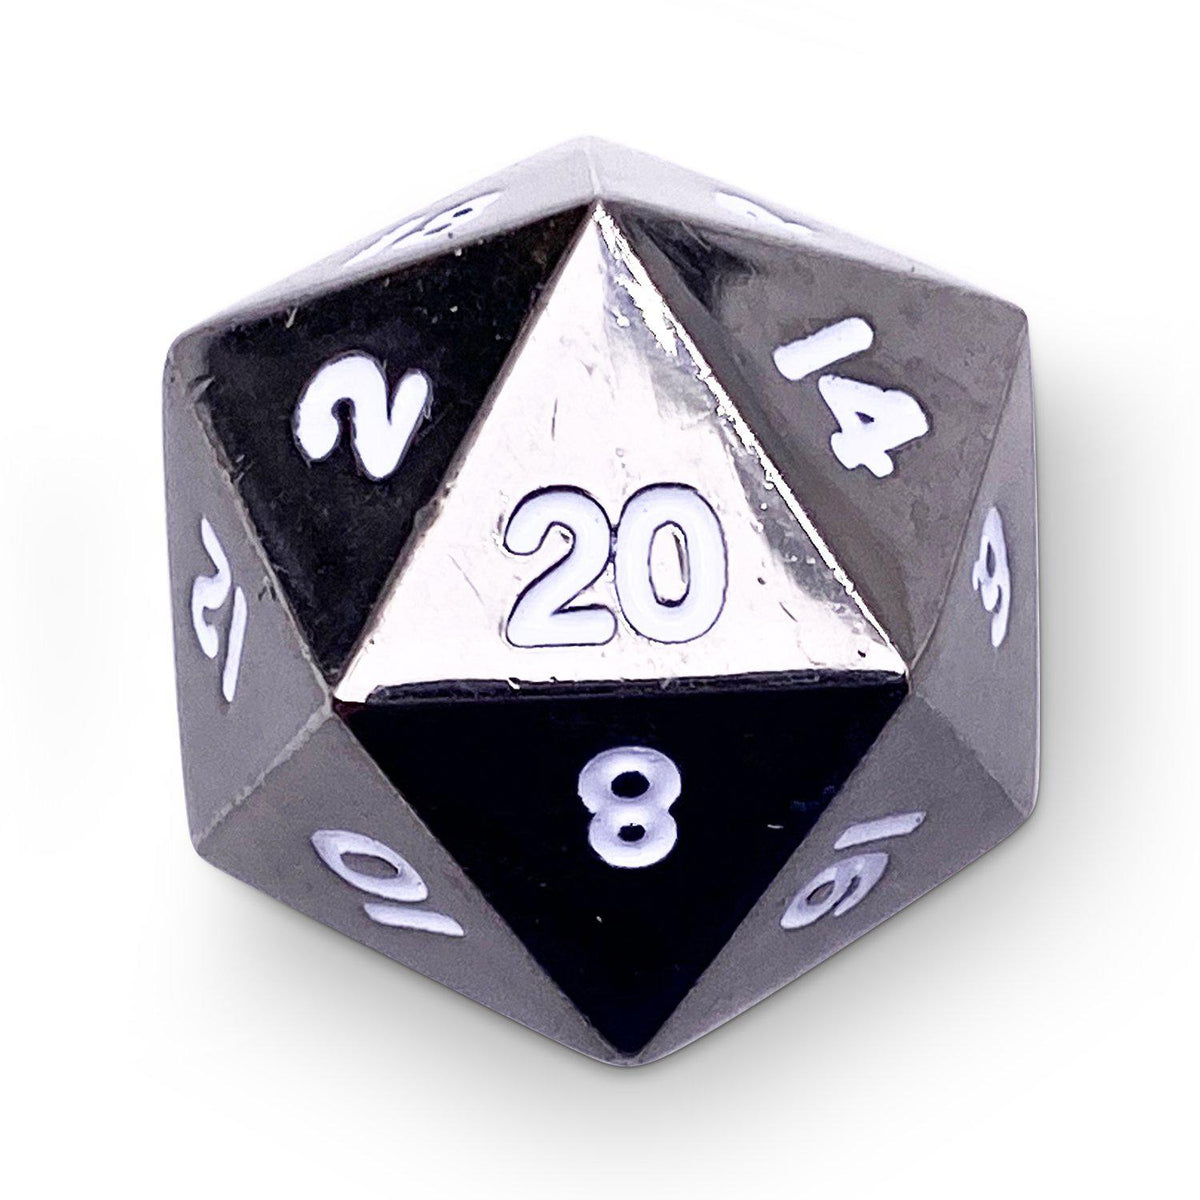 Single Alloy D20 in Drow Black by Norse Foundry - NOR 04558